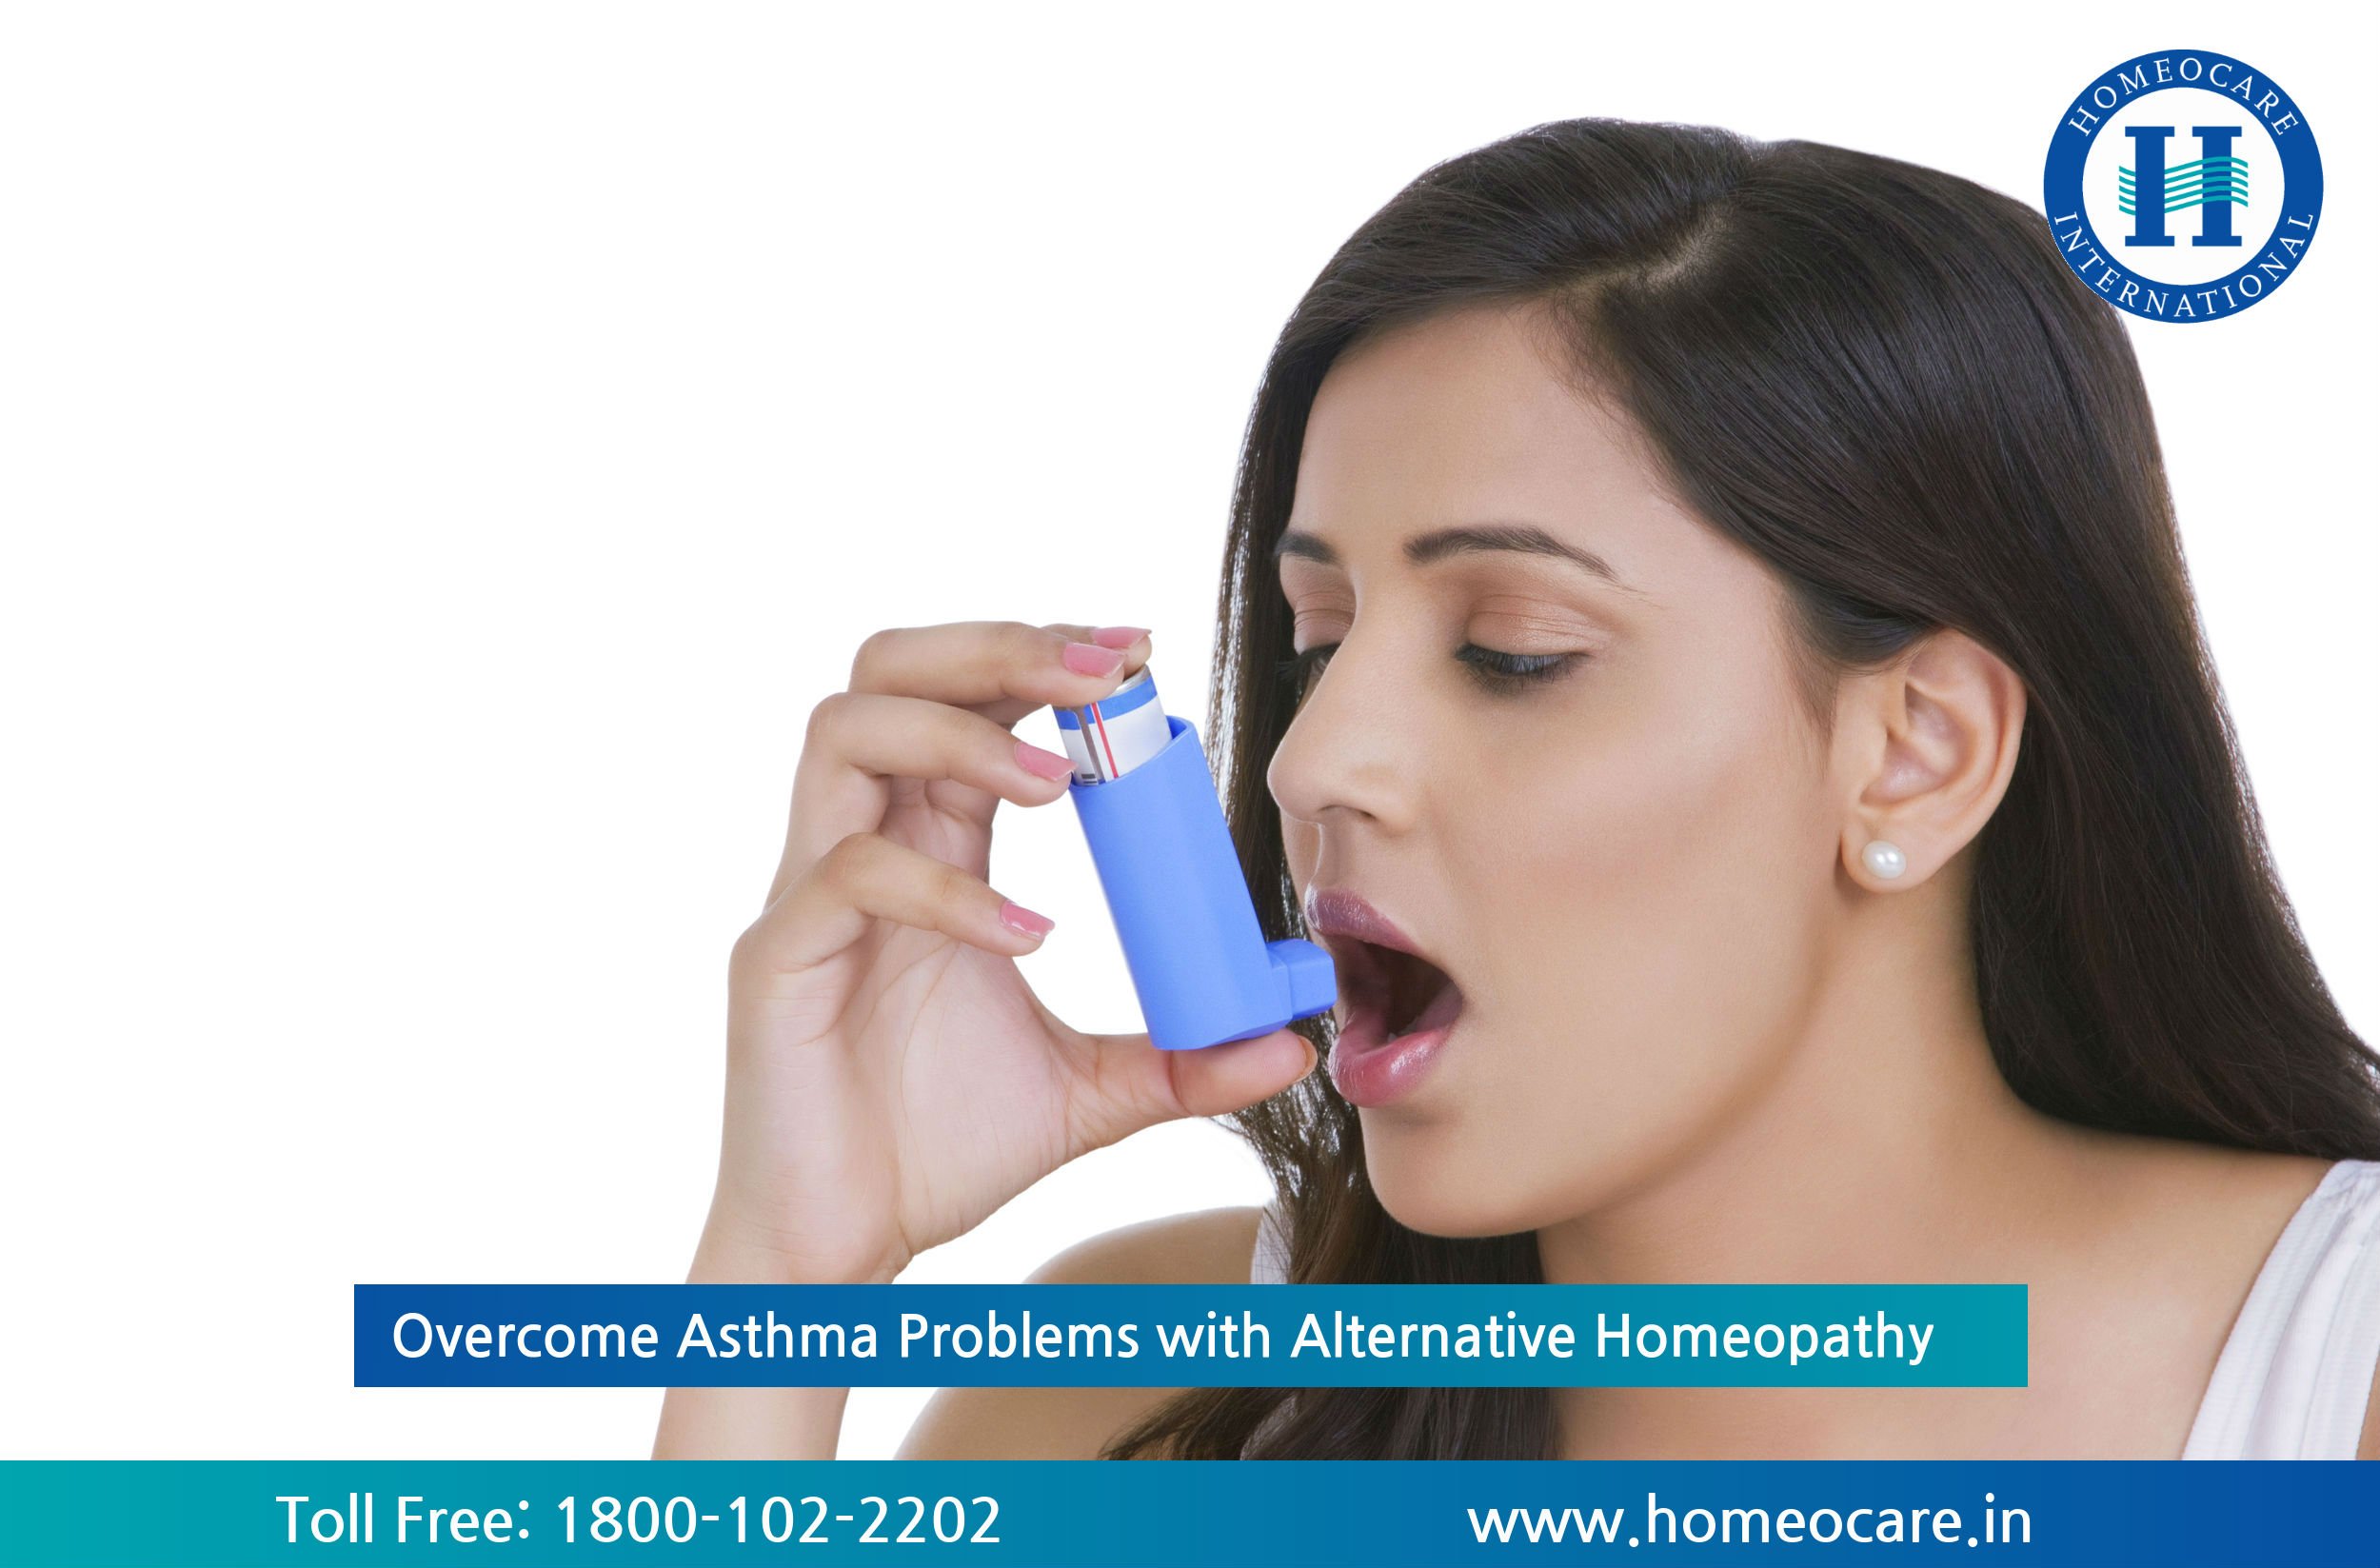 Cold Weather Effects on Asthma People  Online Homeocare